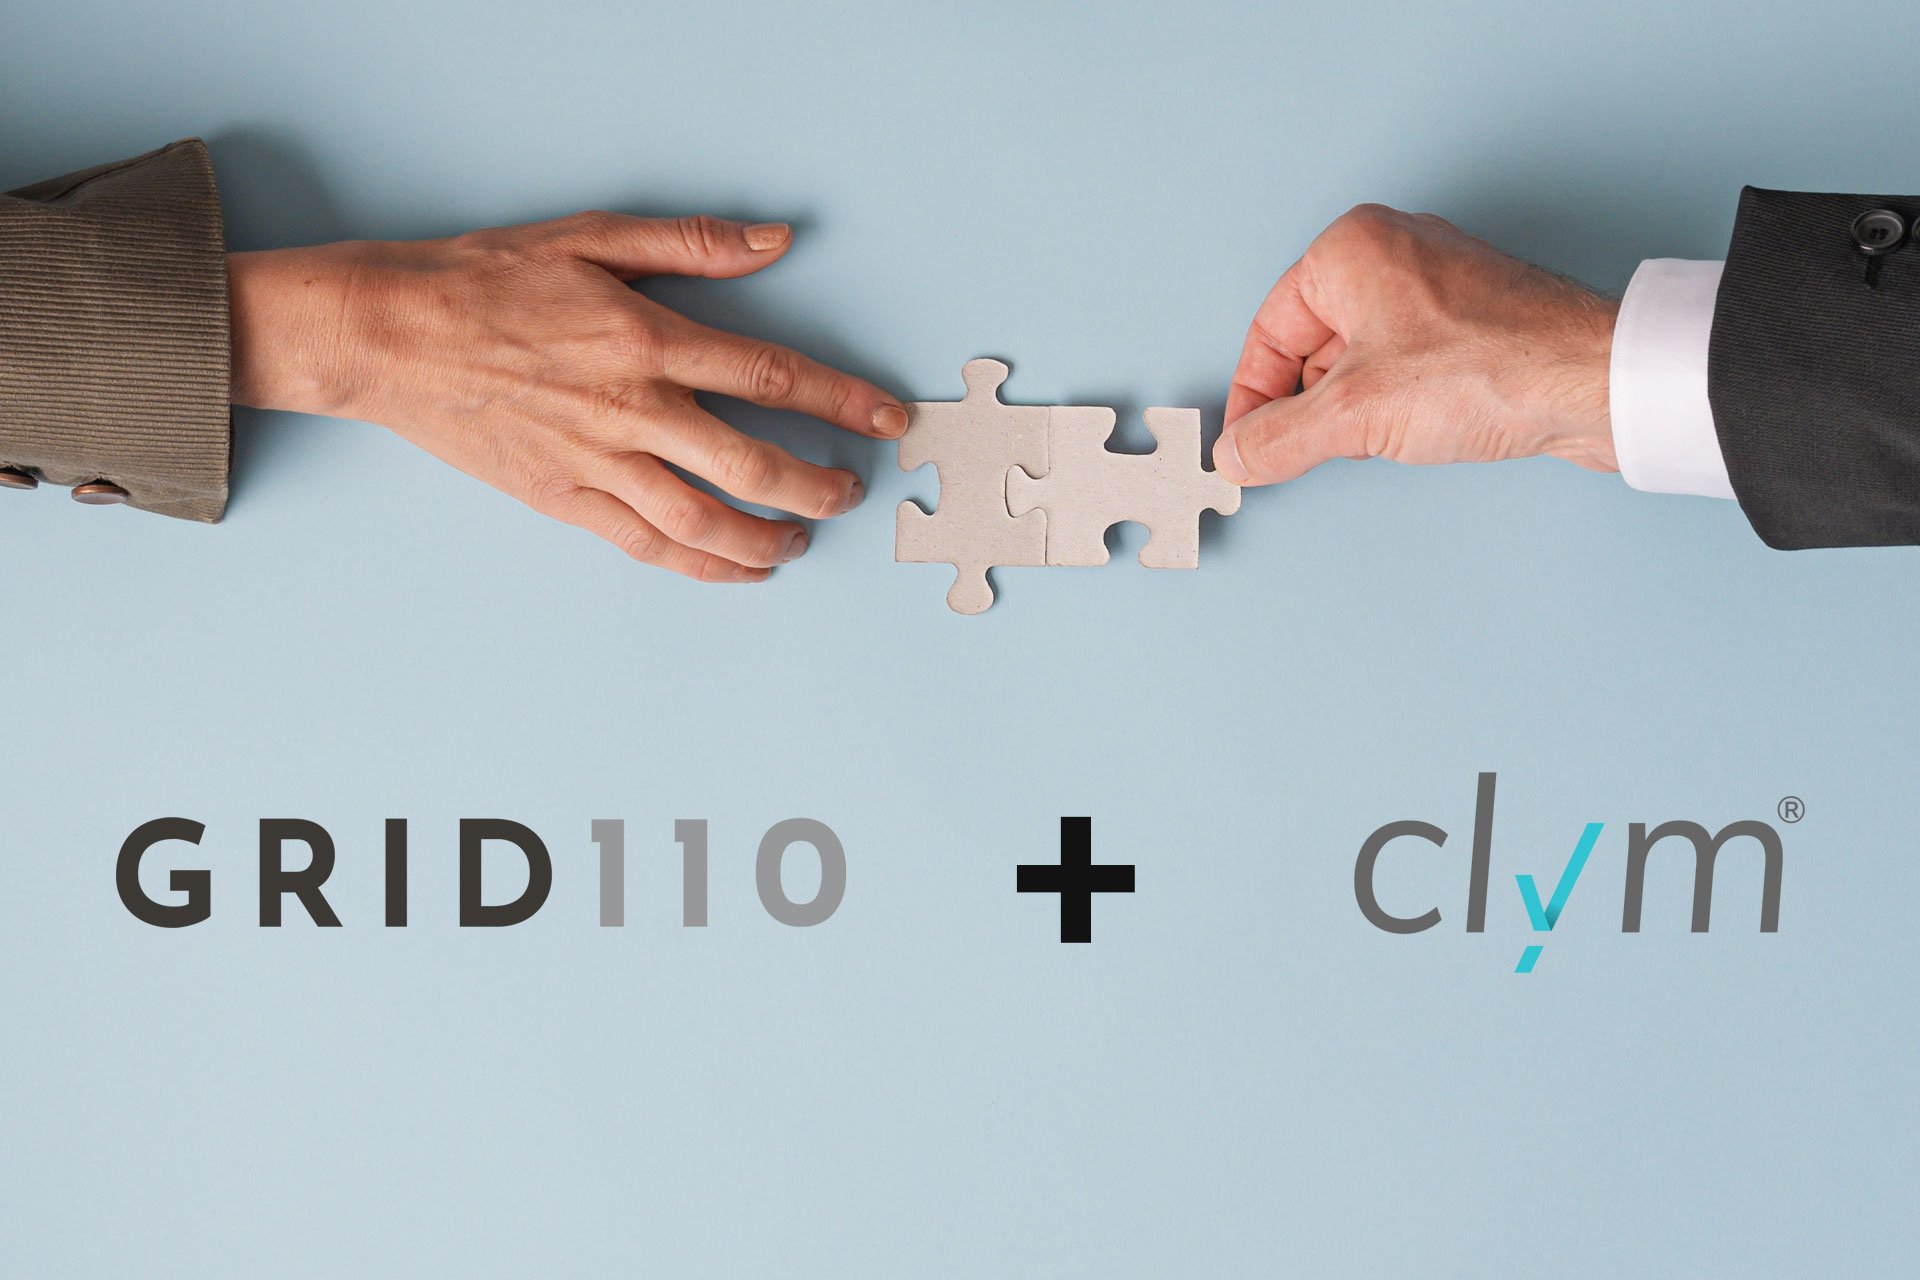 two hands and logos for Grid110 and Clym 